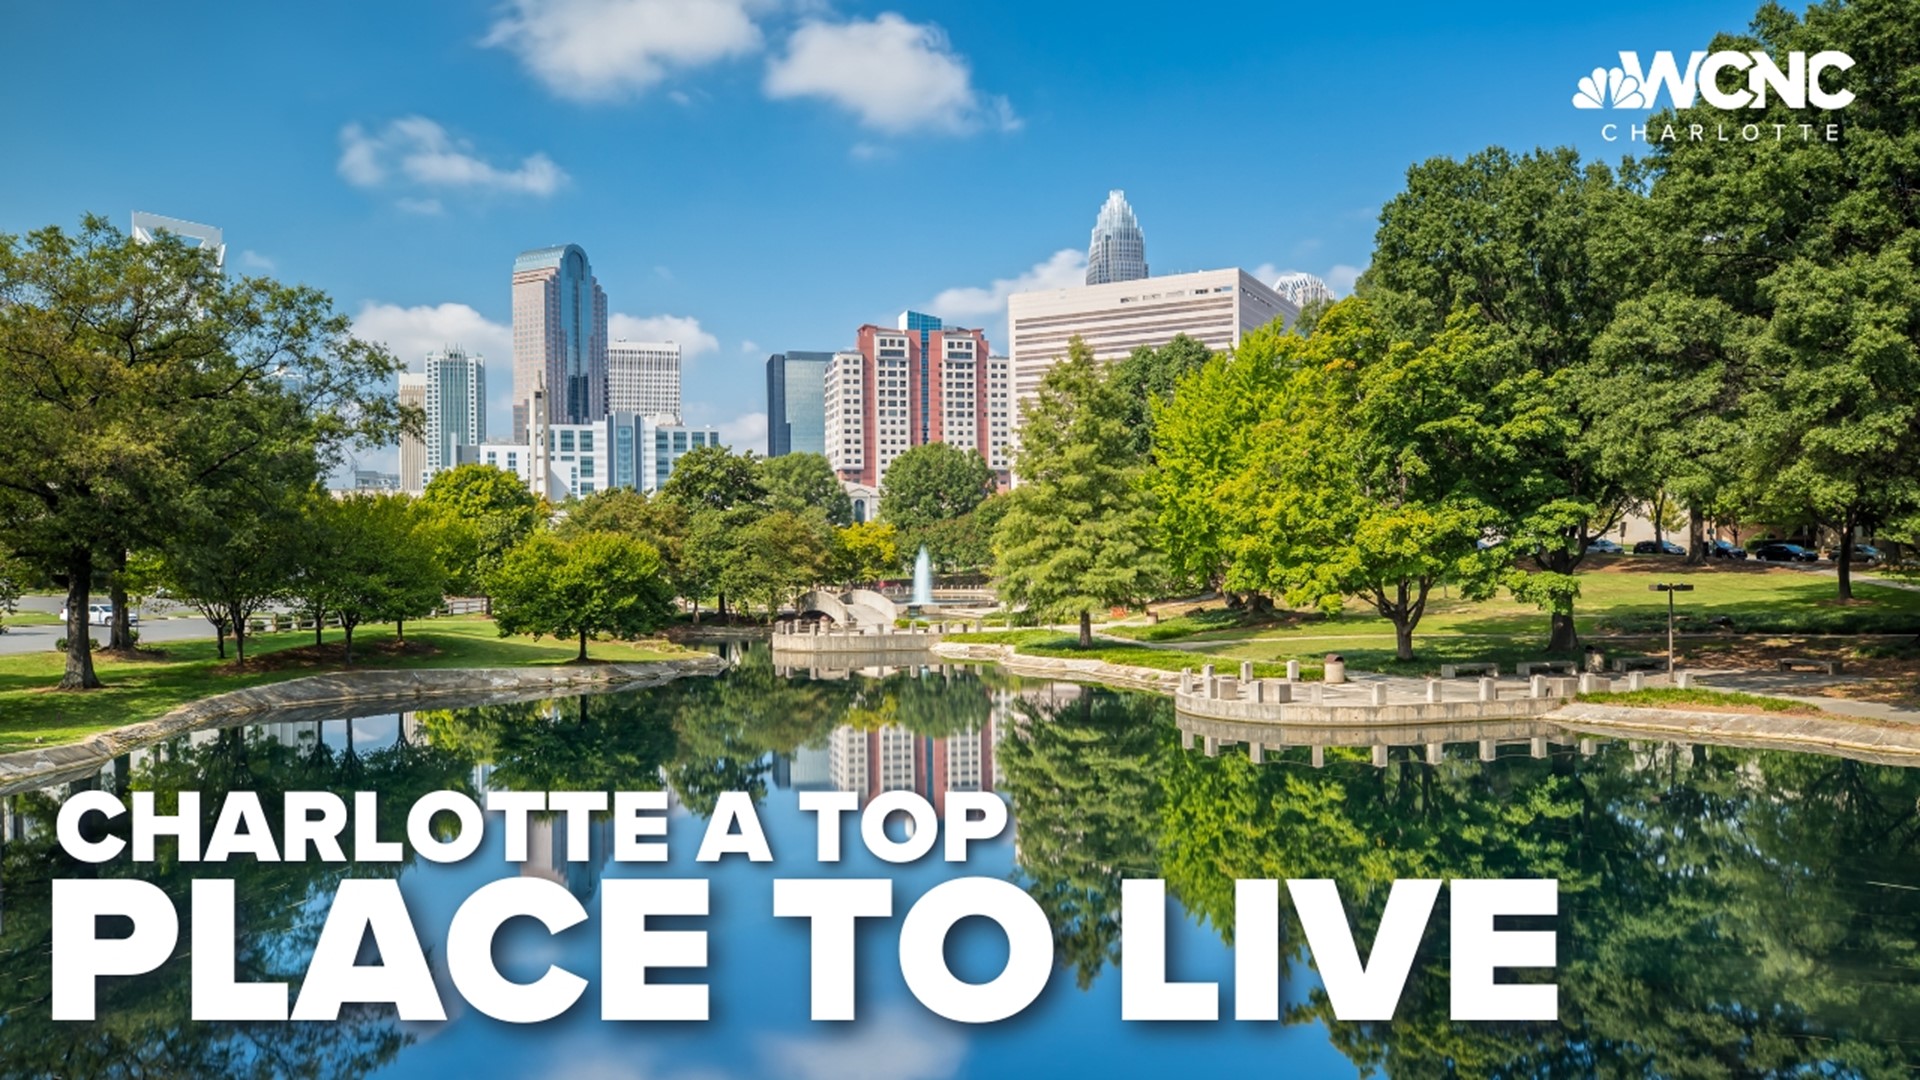 According to US News and World Report, Charlotte ranks as the eighth best place to live in the country.